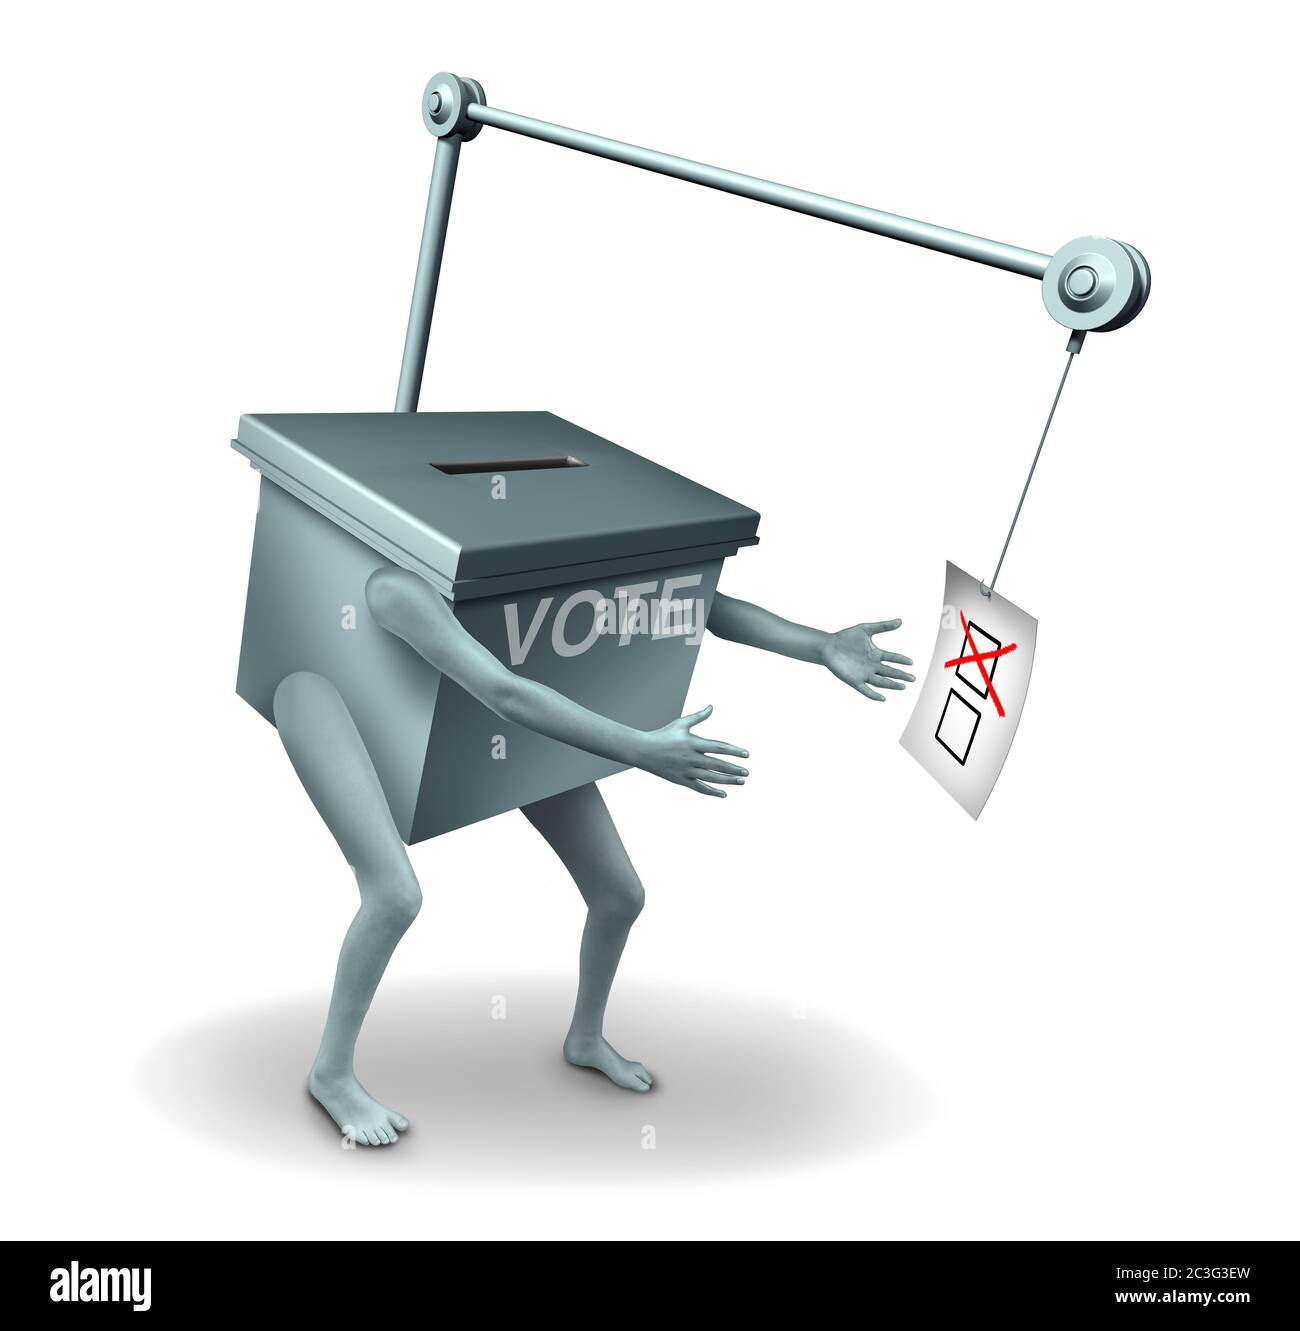 Searching for votes and election or campaigning for ballots as a voting box chasing a voter ballot representing politics or politician candidate. Stock Photo